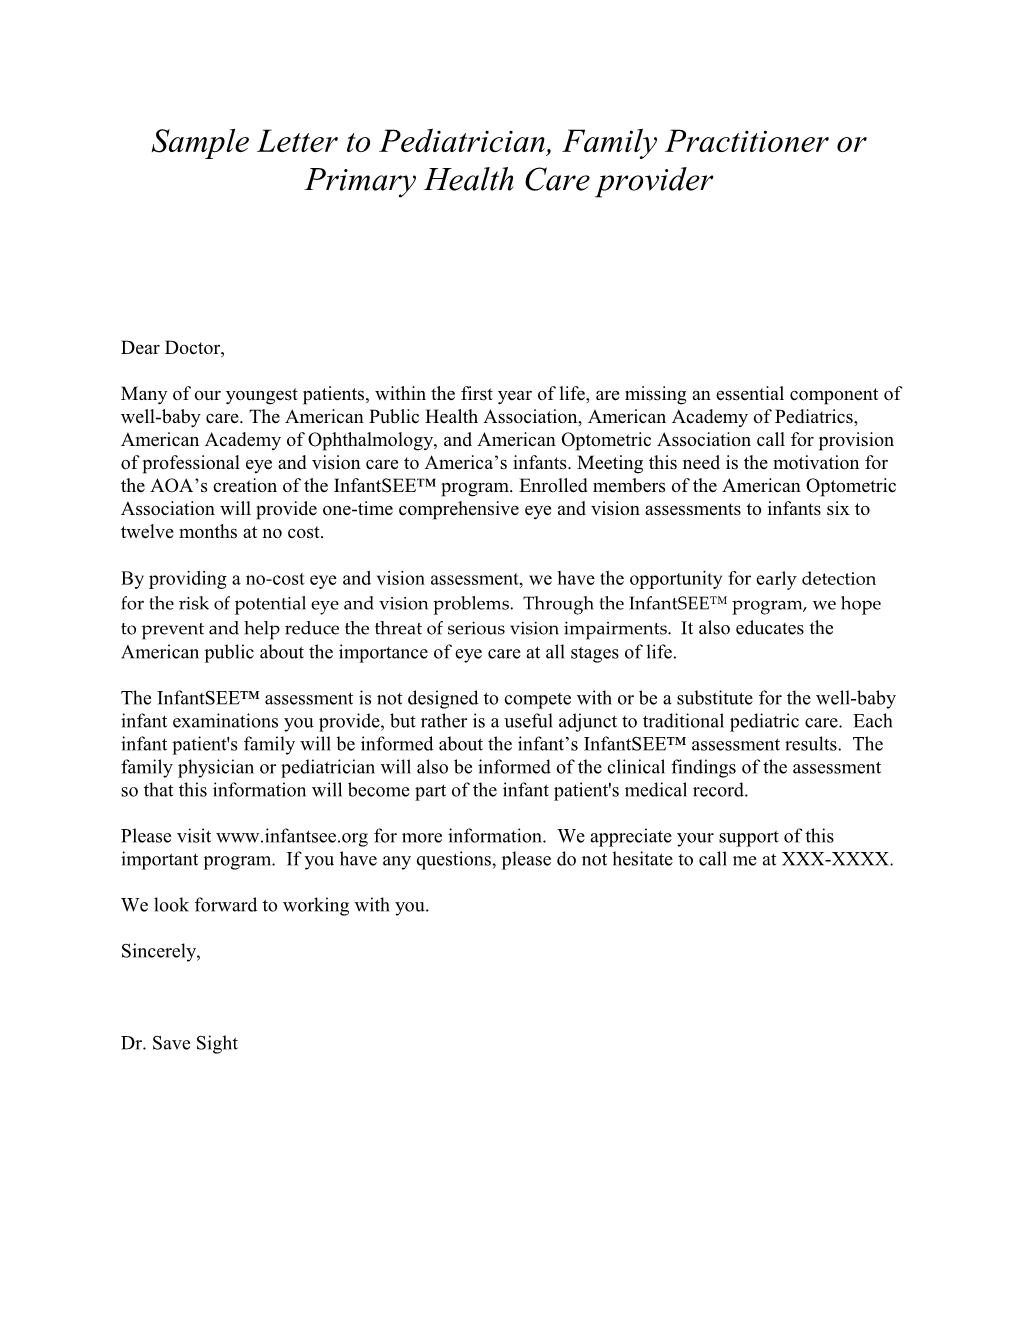 Sample Letter to Pediatrician, Family Practitioner Or Primary Health Care Provider